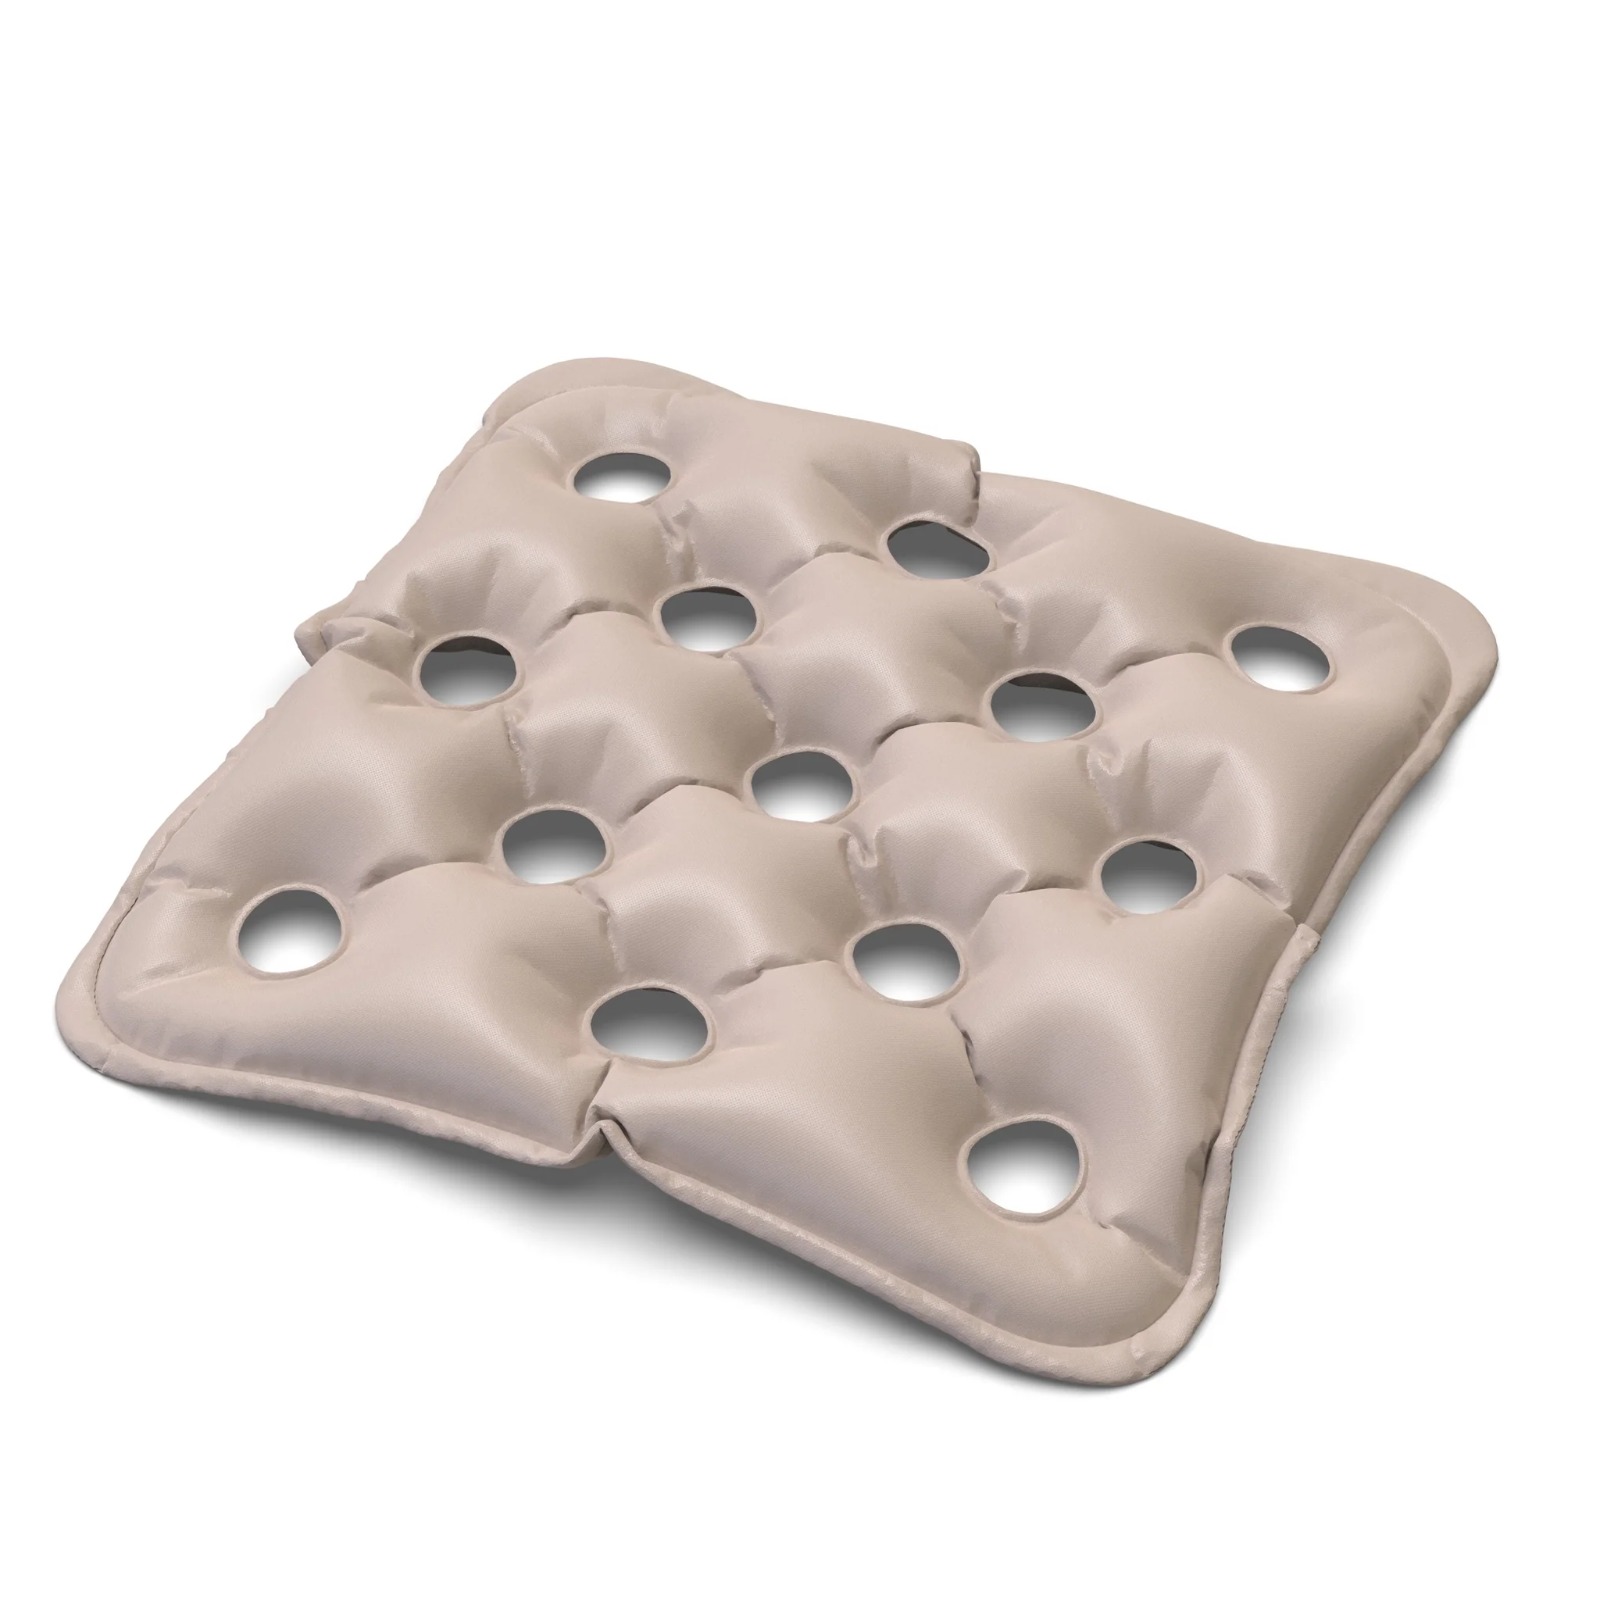 ALMOHADA ASIENTO INFLABLE CON INFLADOR (THERAVENT)